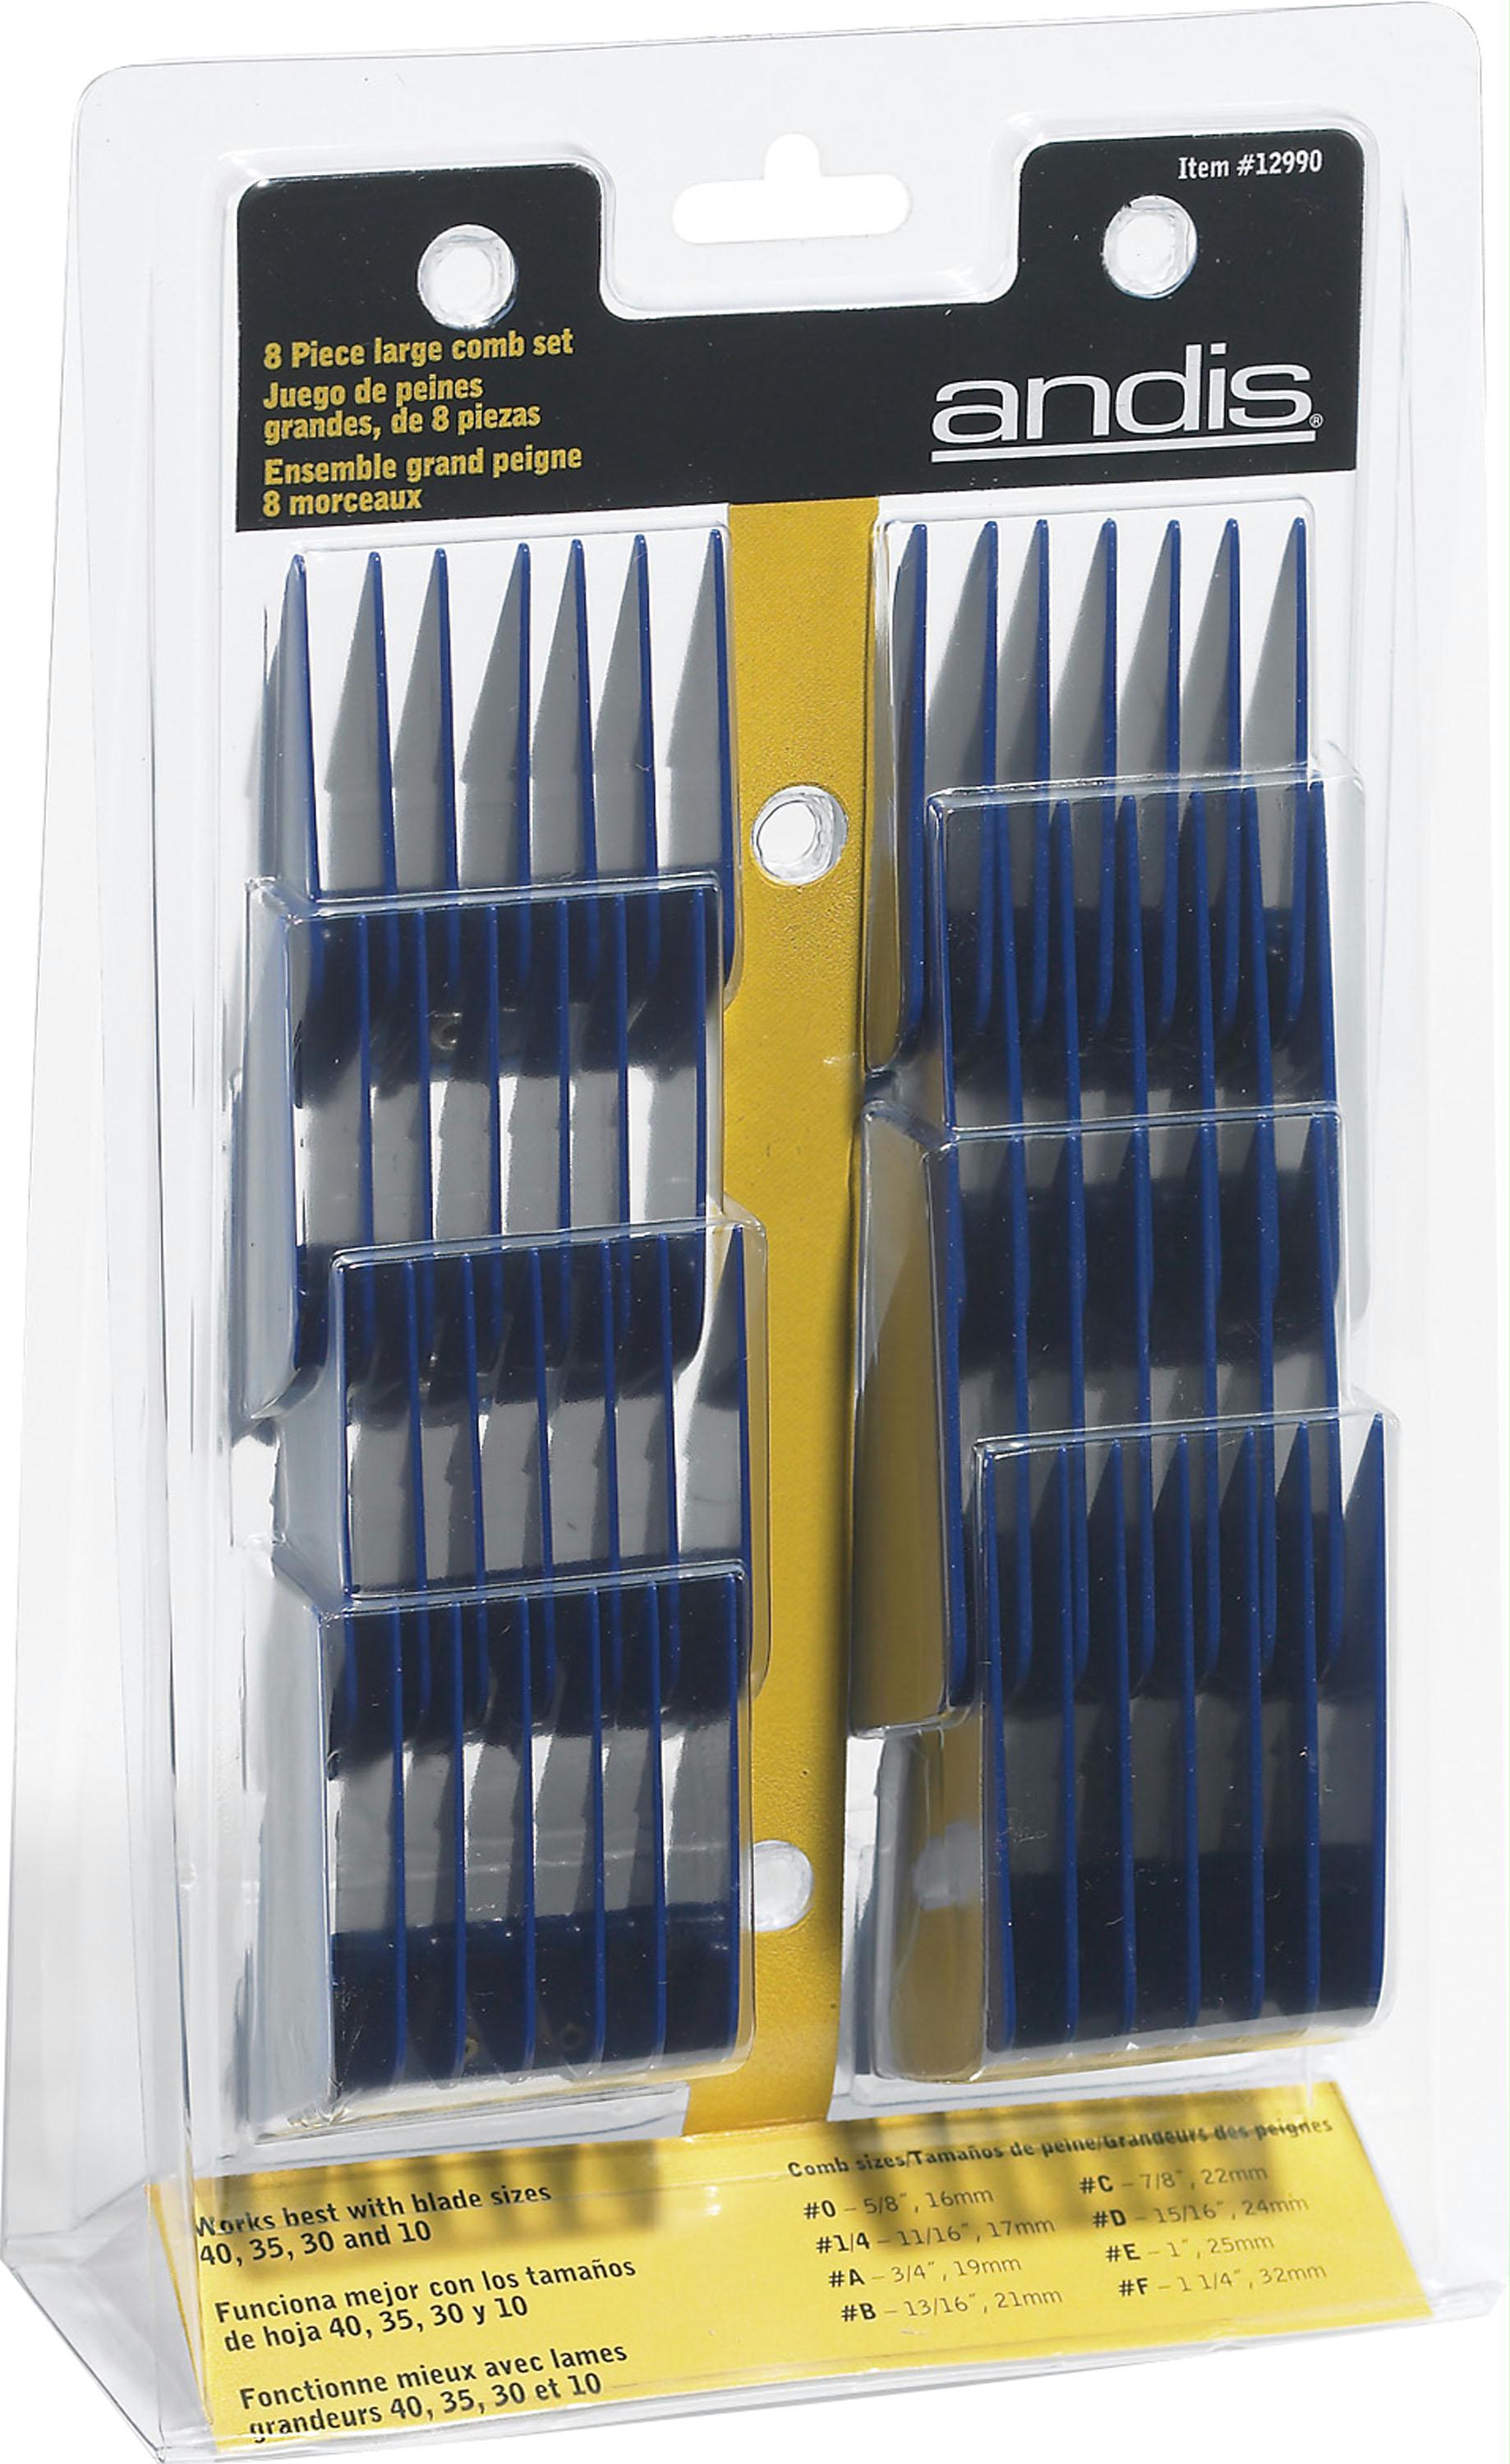 Universal Combs Set - aomega-products